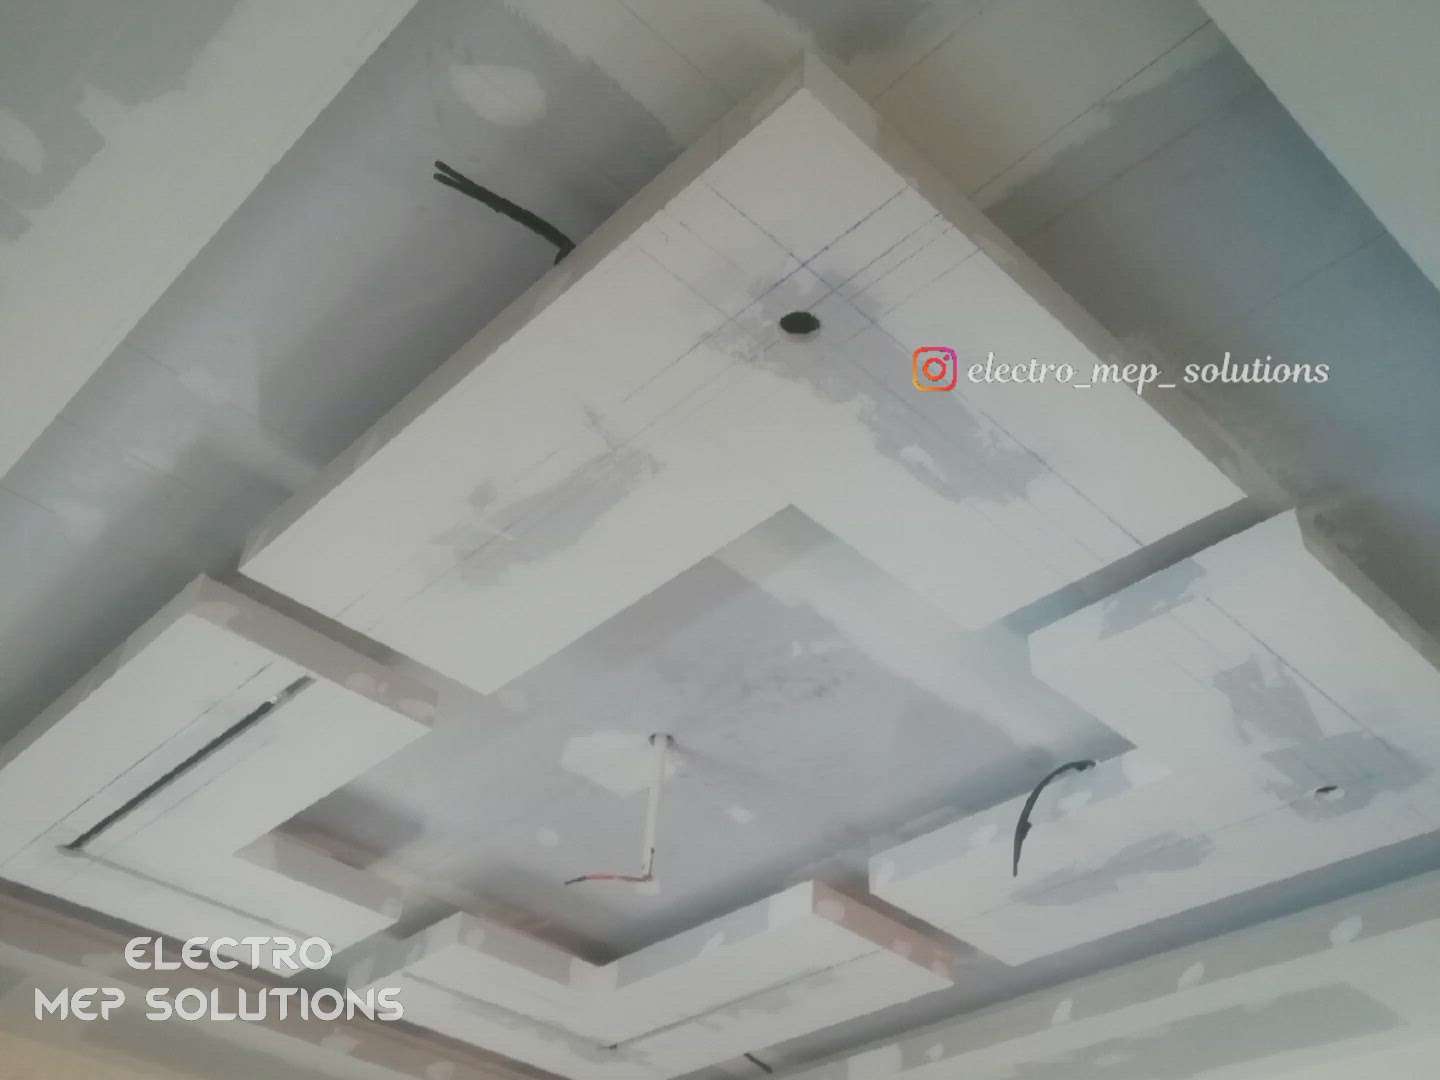 #profilelight_  #profilelighting  #popceiling  #GypsumCeiling  #electricalwork  #Electrical